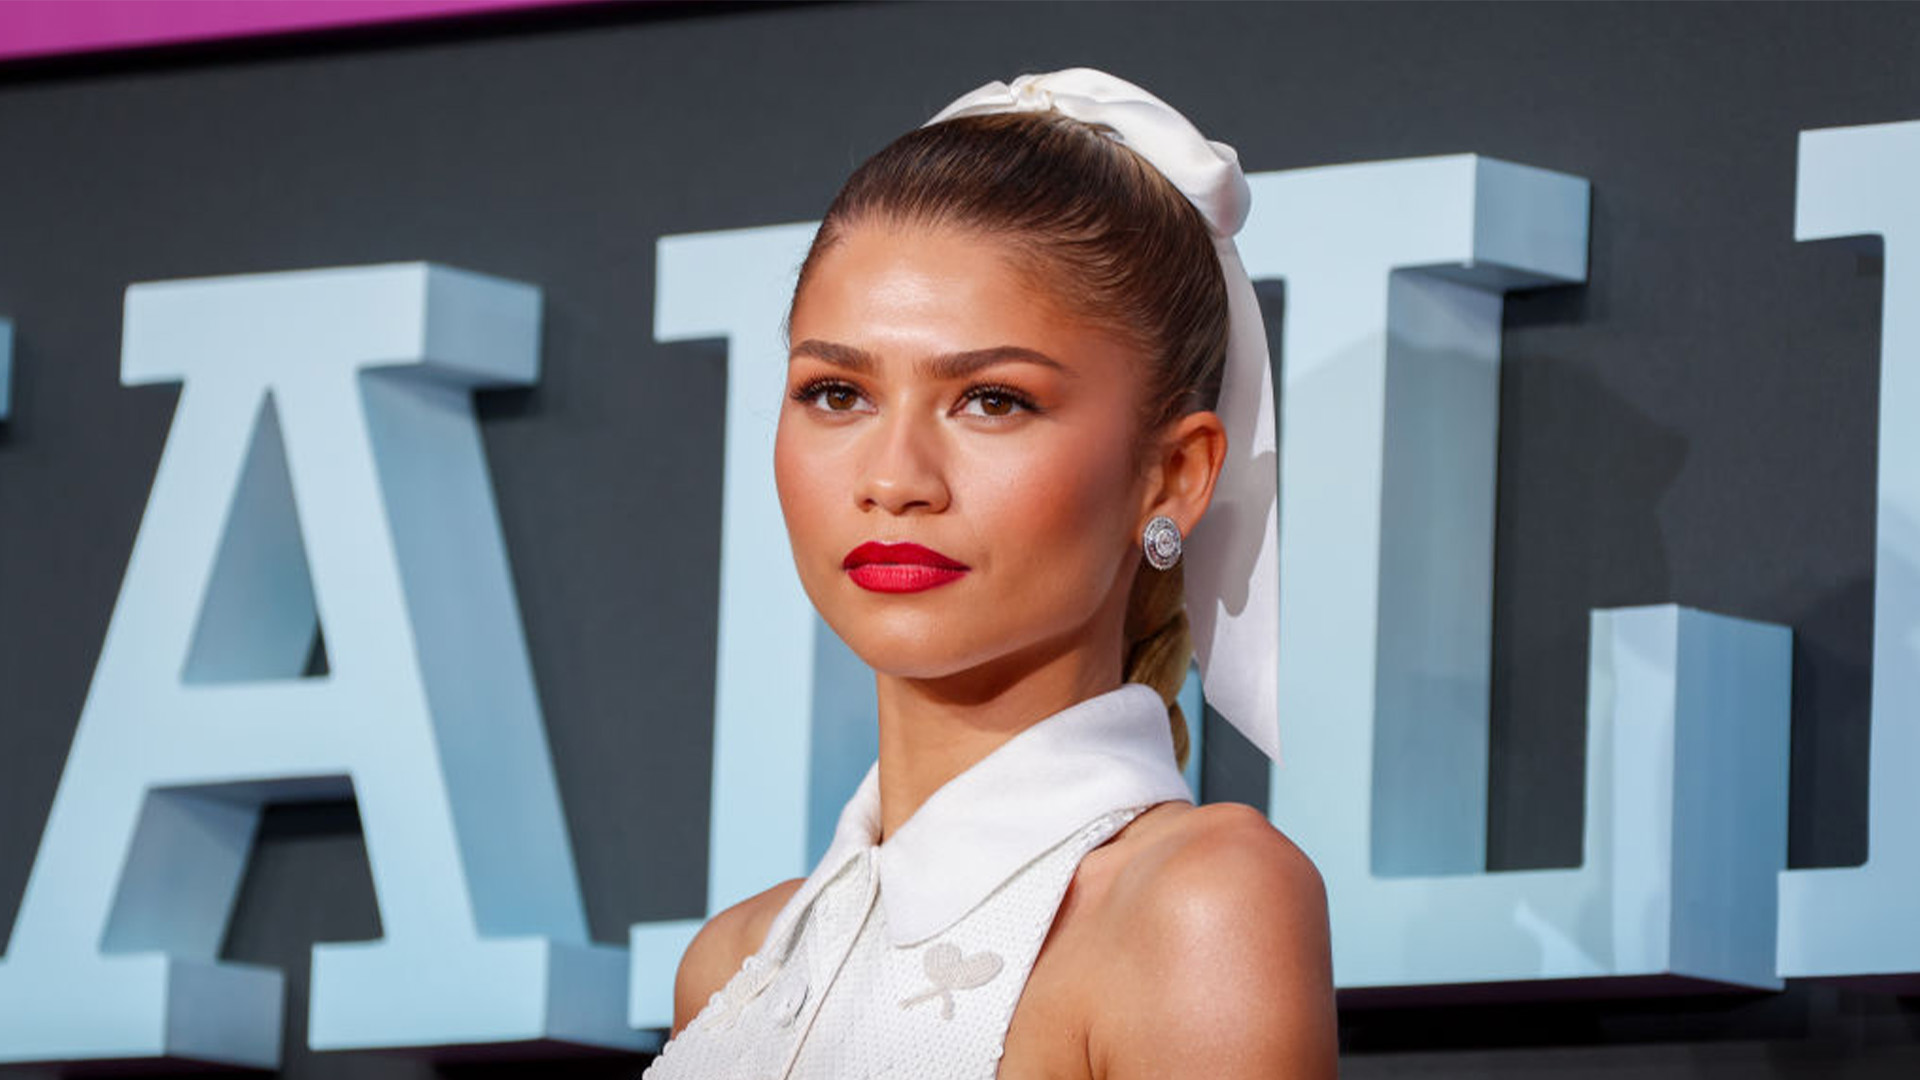 Zendaya, Who Now Has An Estimated Net Worth Of $22M, Opens Up About Becoming The 'Breadwinner Of My Family Very Early'